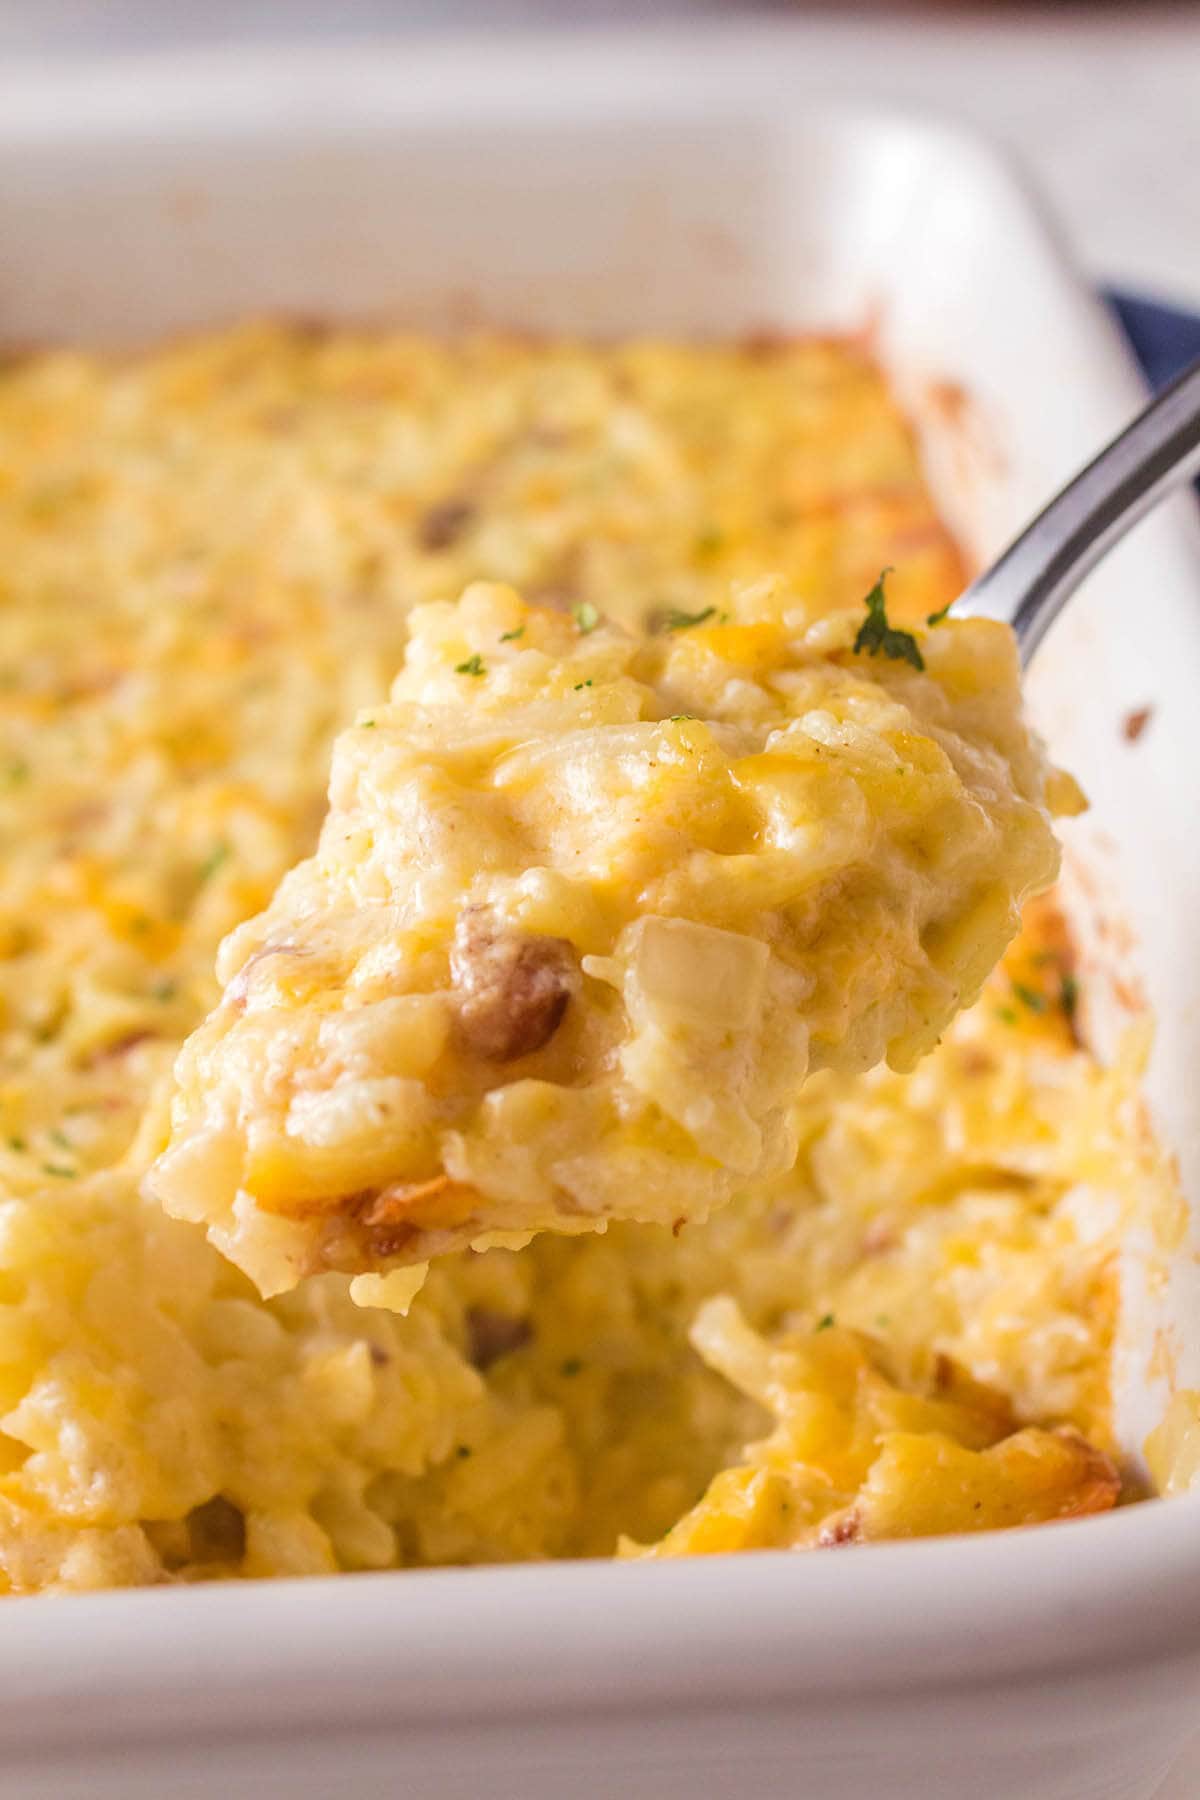 Cheesy potatoes in casserole dish with serving spoon.